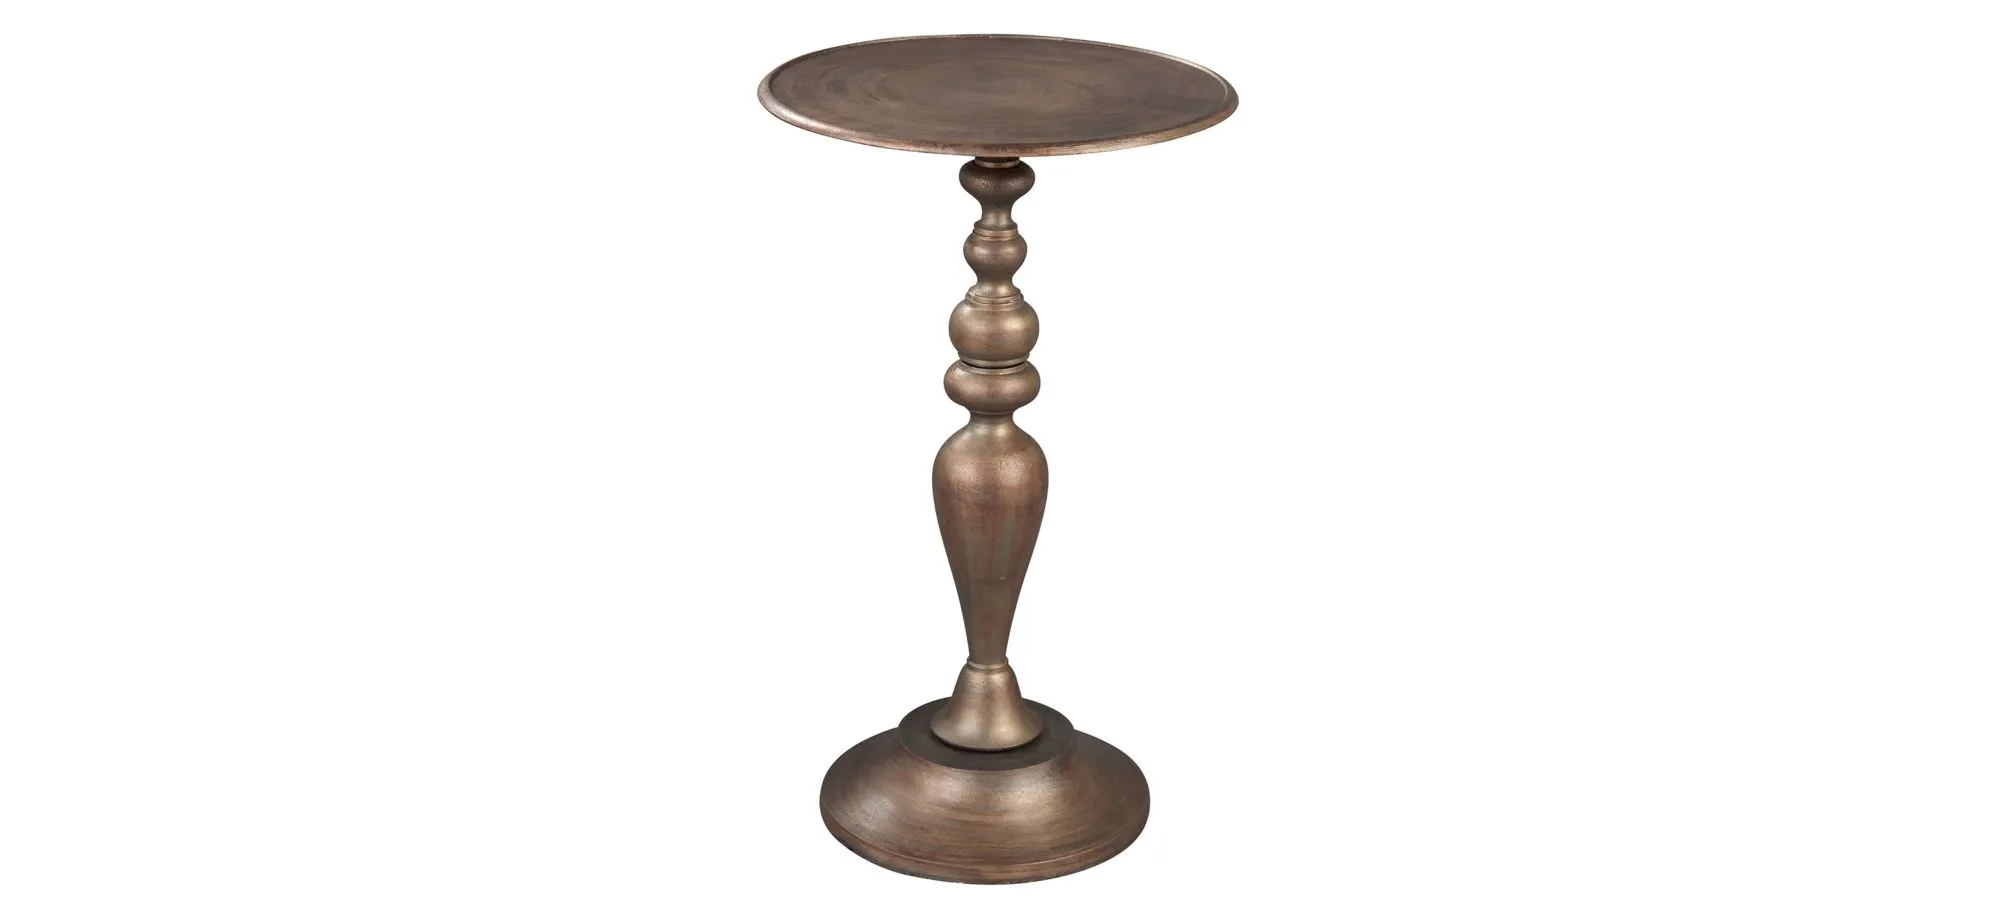 Hekman Reserve Pedestal Table in SPECIAL RESERVE by Hekman Furniture Company